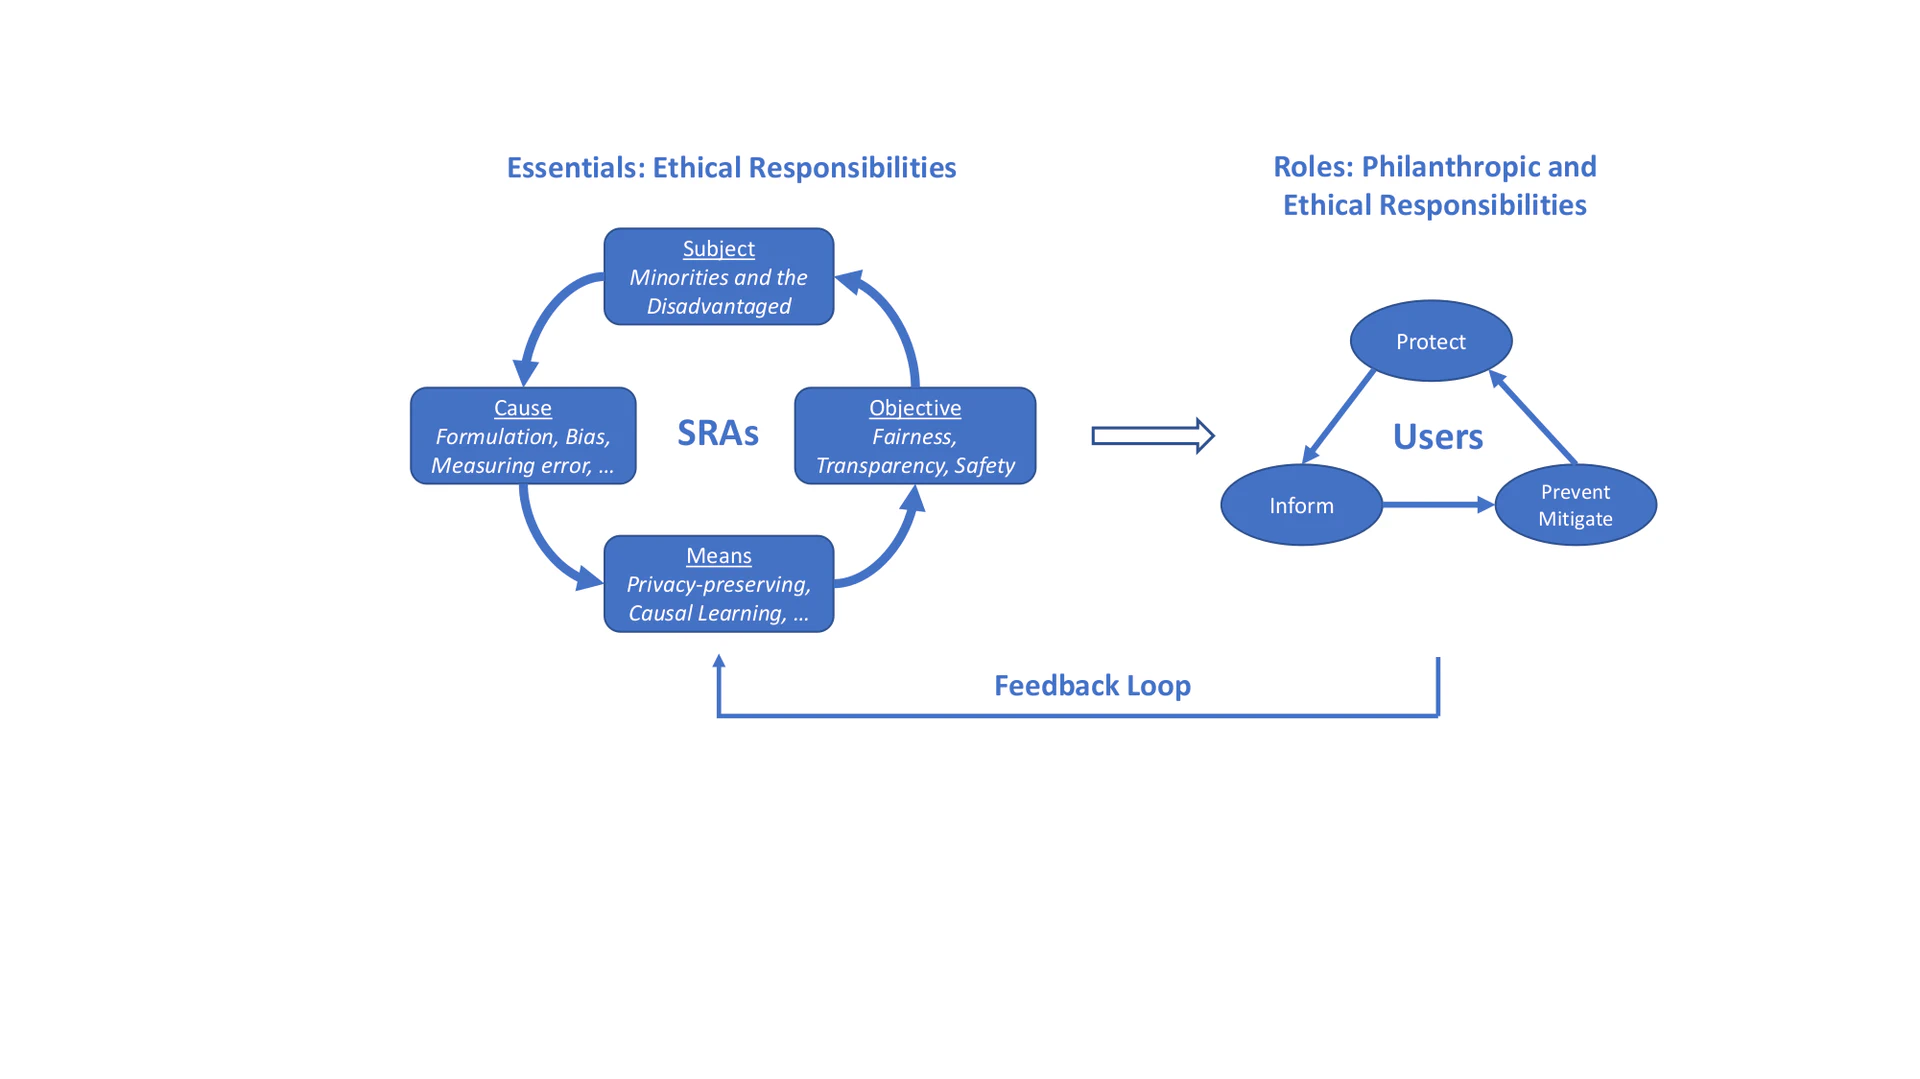 The framework of Socially Responsible AI Algorithms (SRAs). It consists of the essentials (i.e., the internal mechanisms) of SRAs (left), their roles (right), and feedback received from end users for helping SRAs gradually achieve the expected social values (bottom). The essentials of SRAs center on the ethical responsibilities of AI and the roles of SRAs require philanthropic responsibilities and ethical responsibilities.